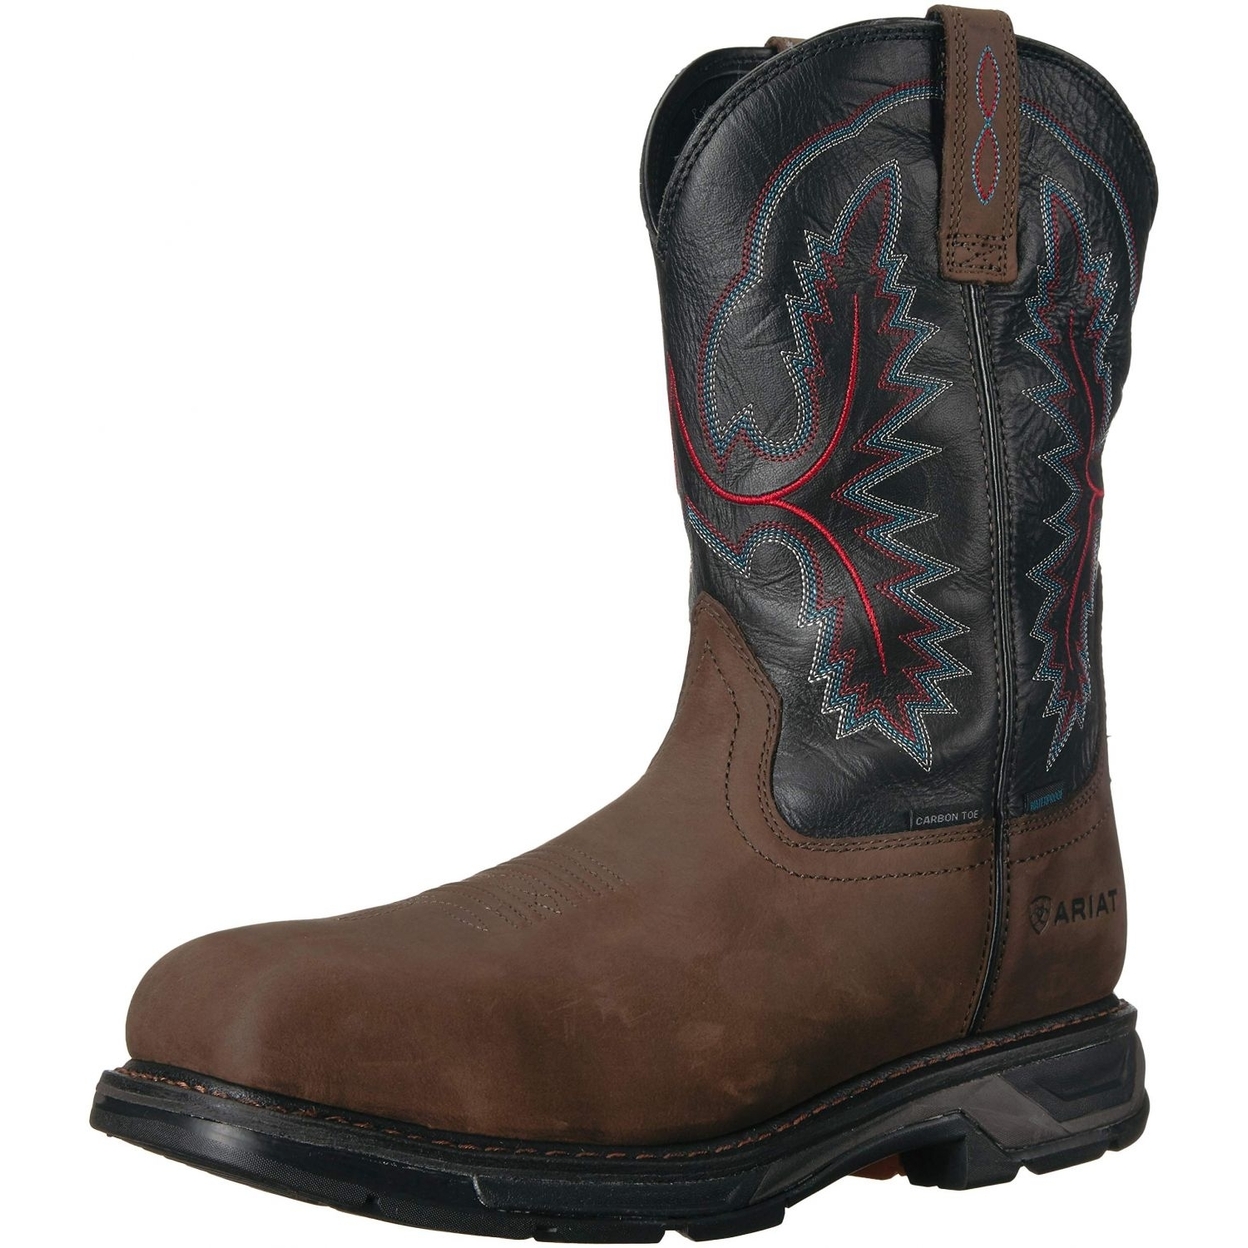 Ariat Work Men's Workhog XT H2O Carbon Toe Western Boot ONE SIZE BRK/ FOREST - BRK/ FOREST, 13-D